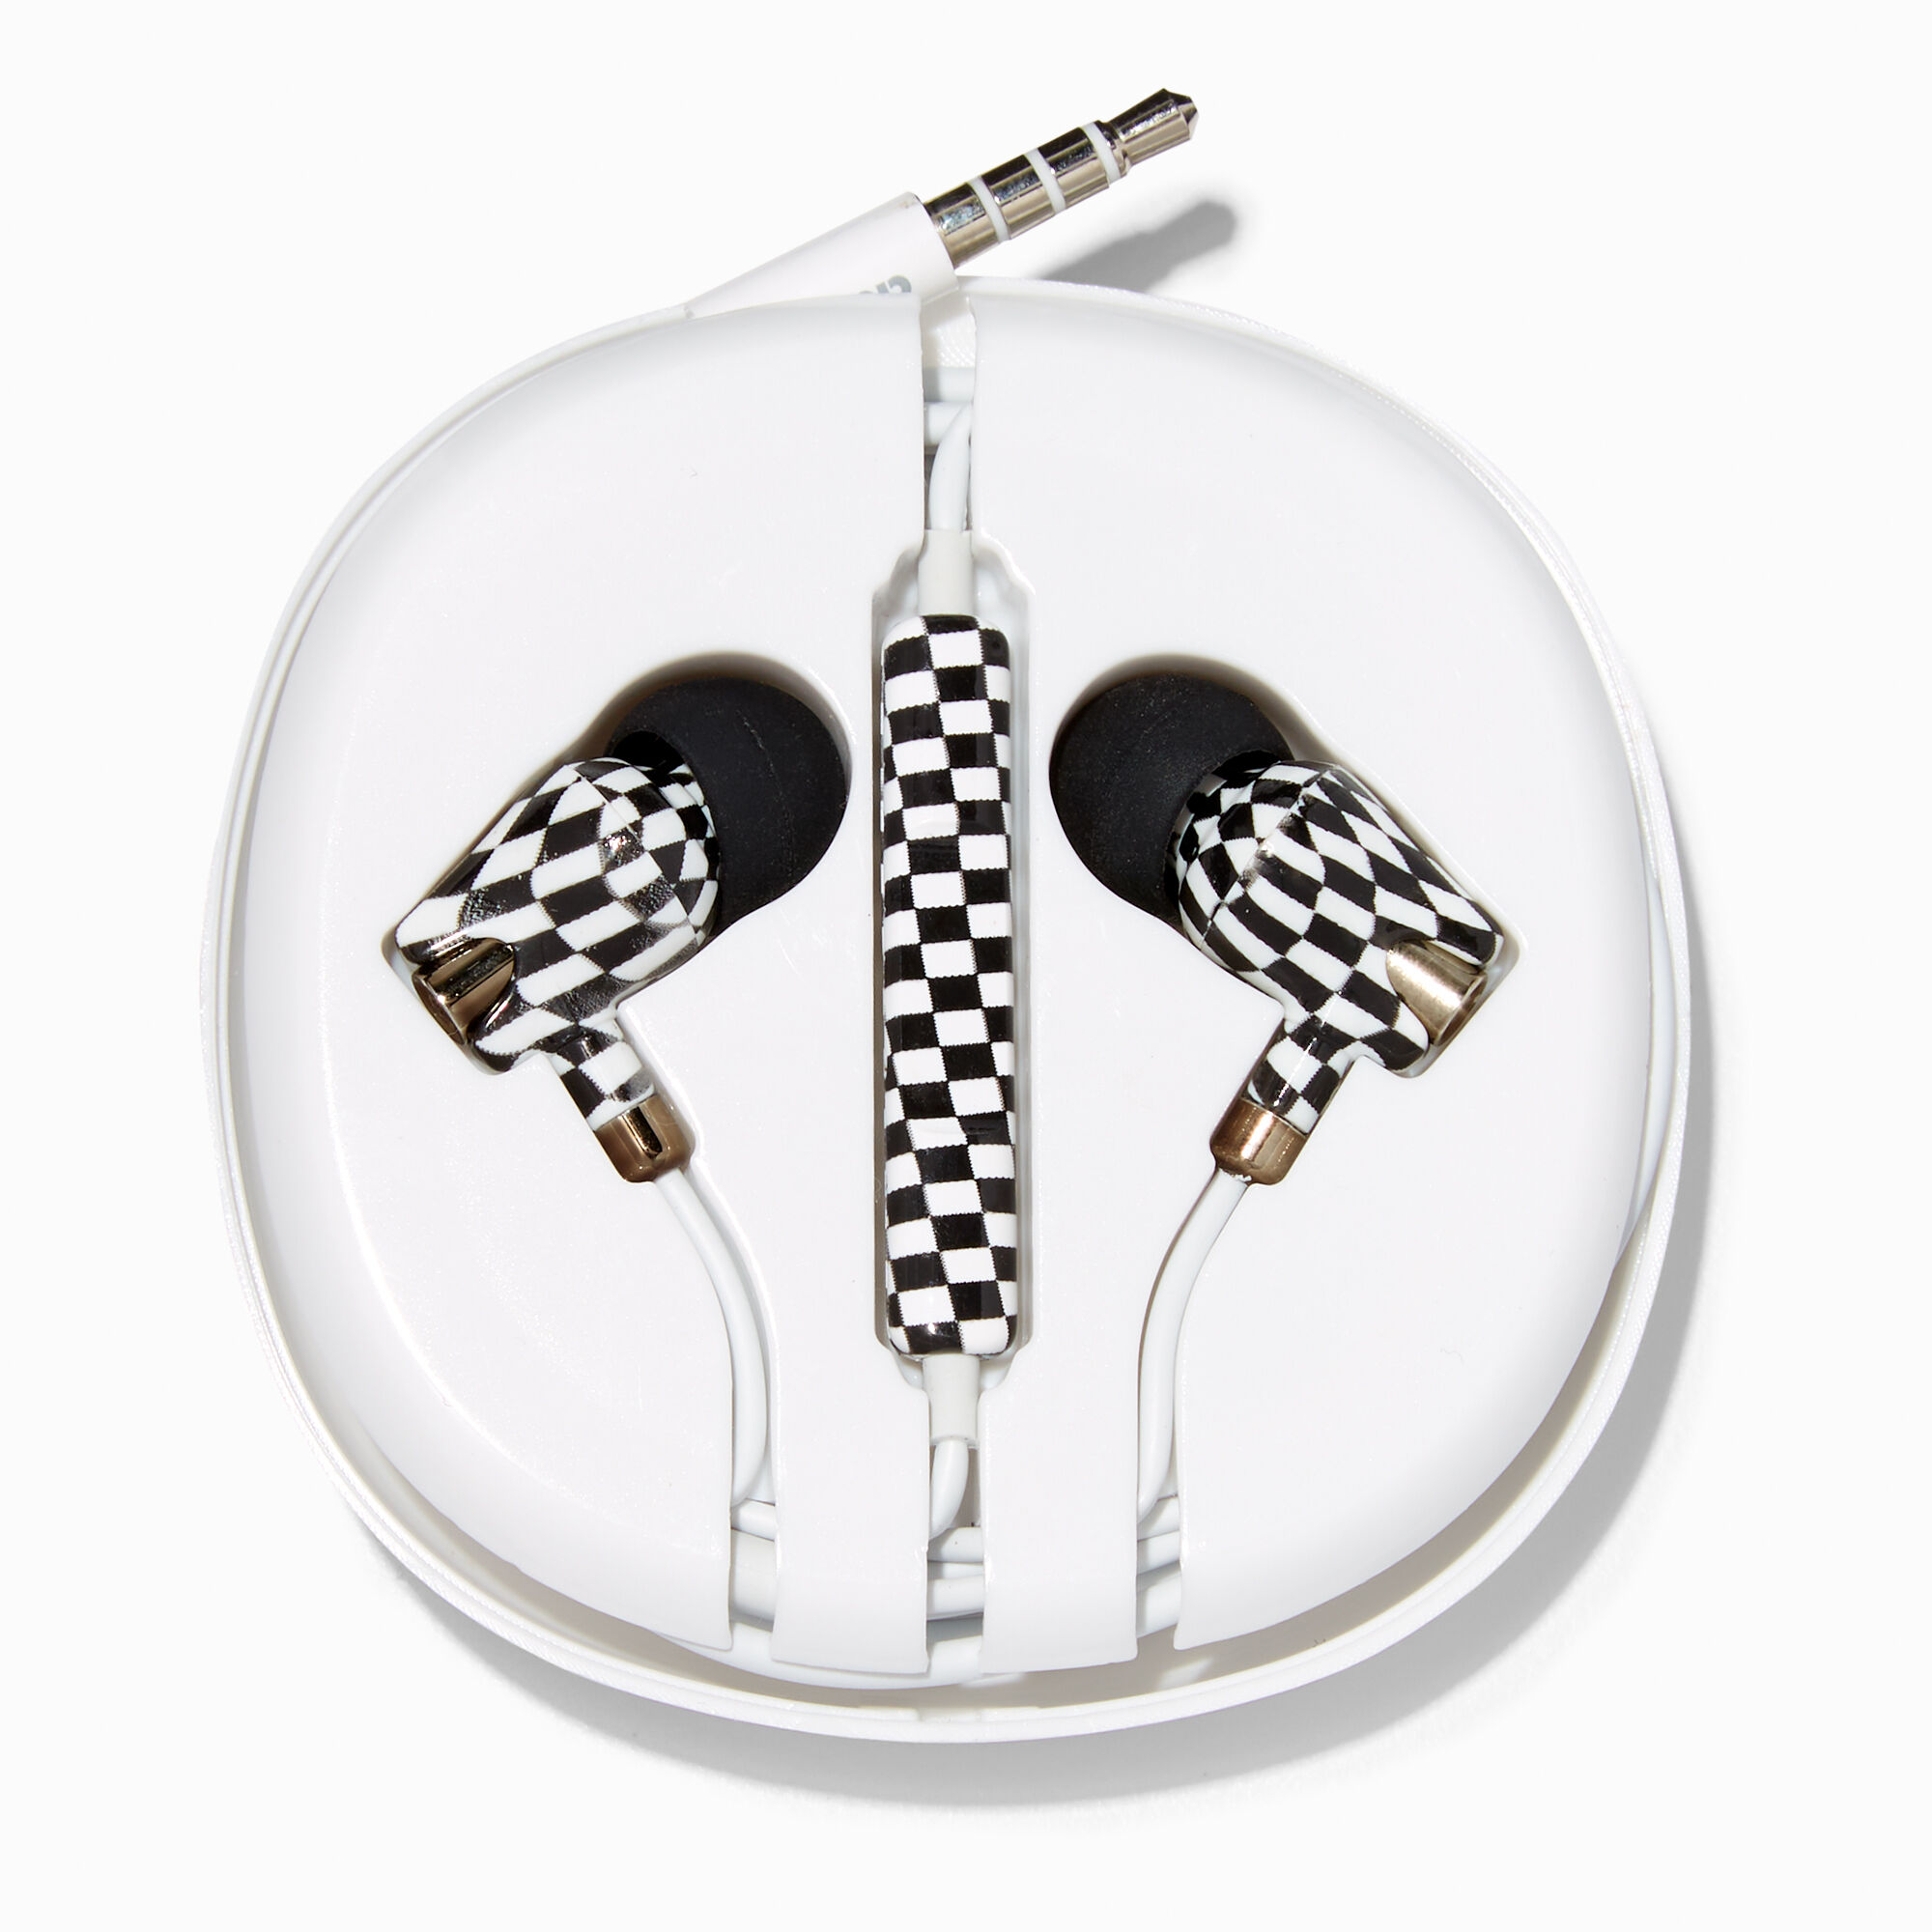 View Claires Black Checkerboard Silicone Earbuds White information